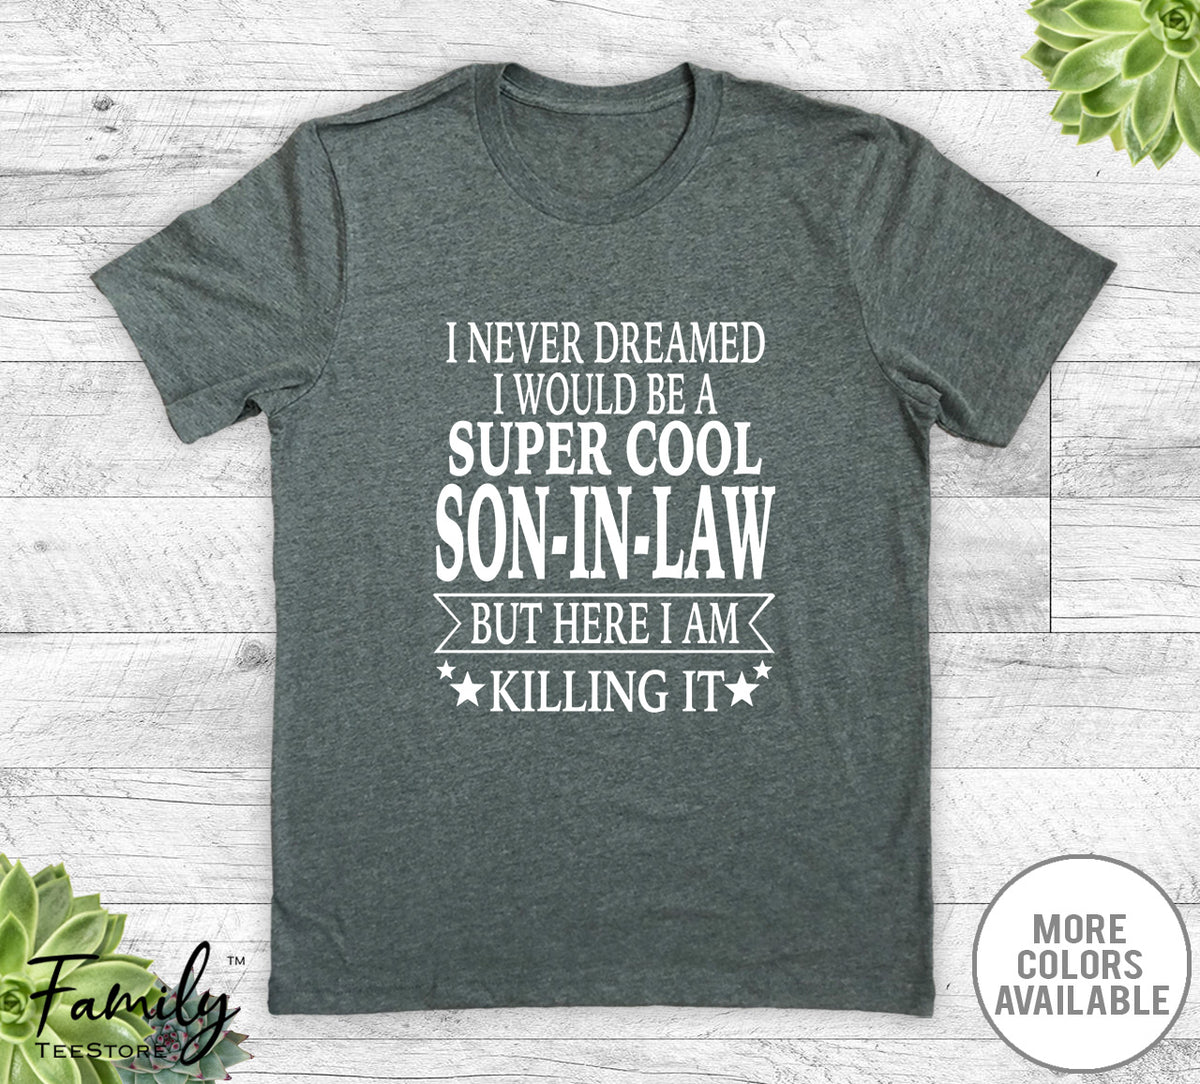 I Never Dreamed I'd Be A Super Cool Son-In-Law - Unisex T-shirt - Son-In-Law Shirt - Son-In-Law Gift